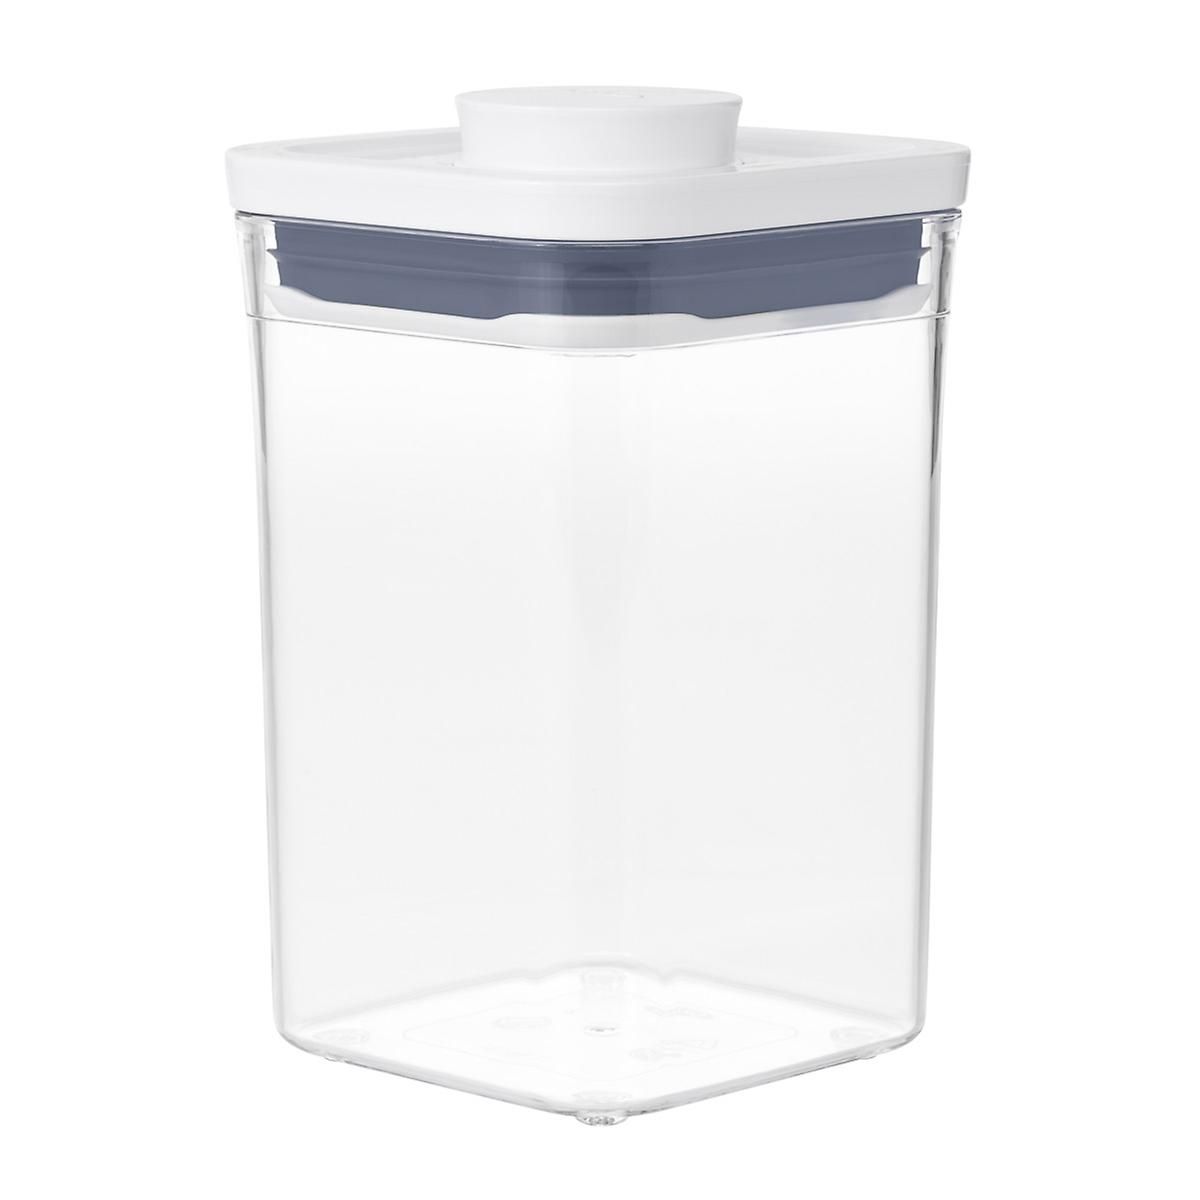 OXO 1.1 Qt. Short Small Square POP Container Short | The Container Store